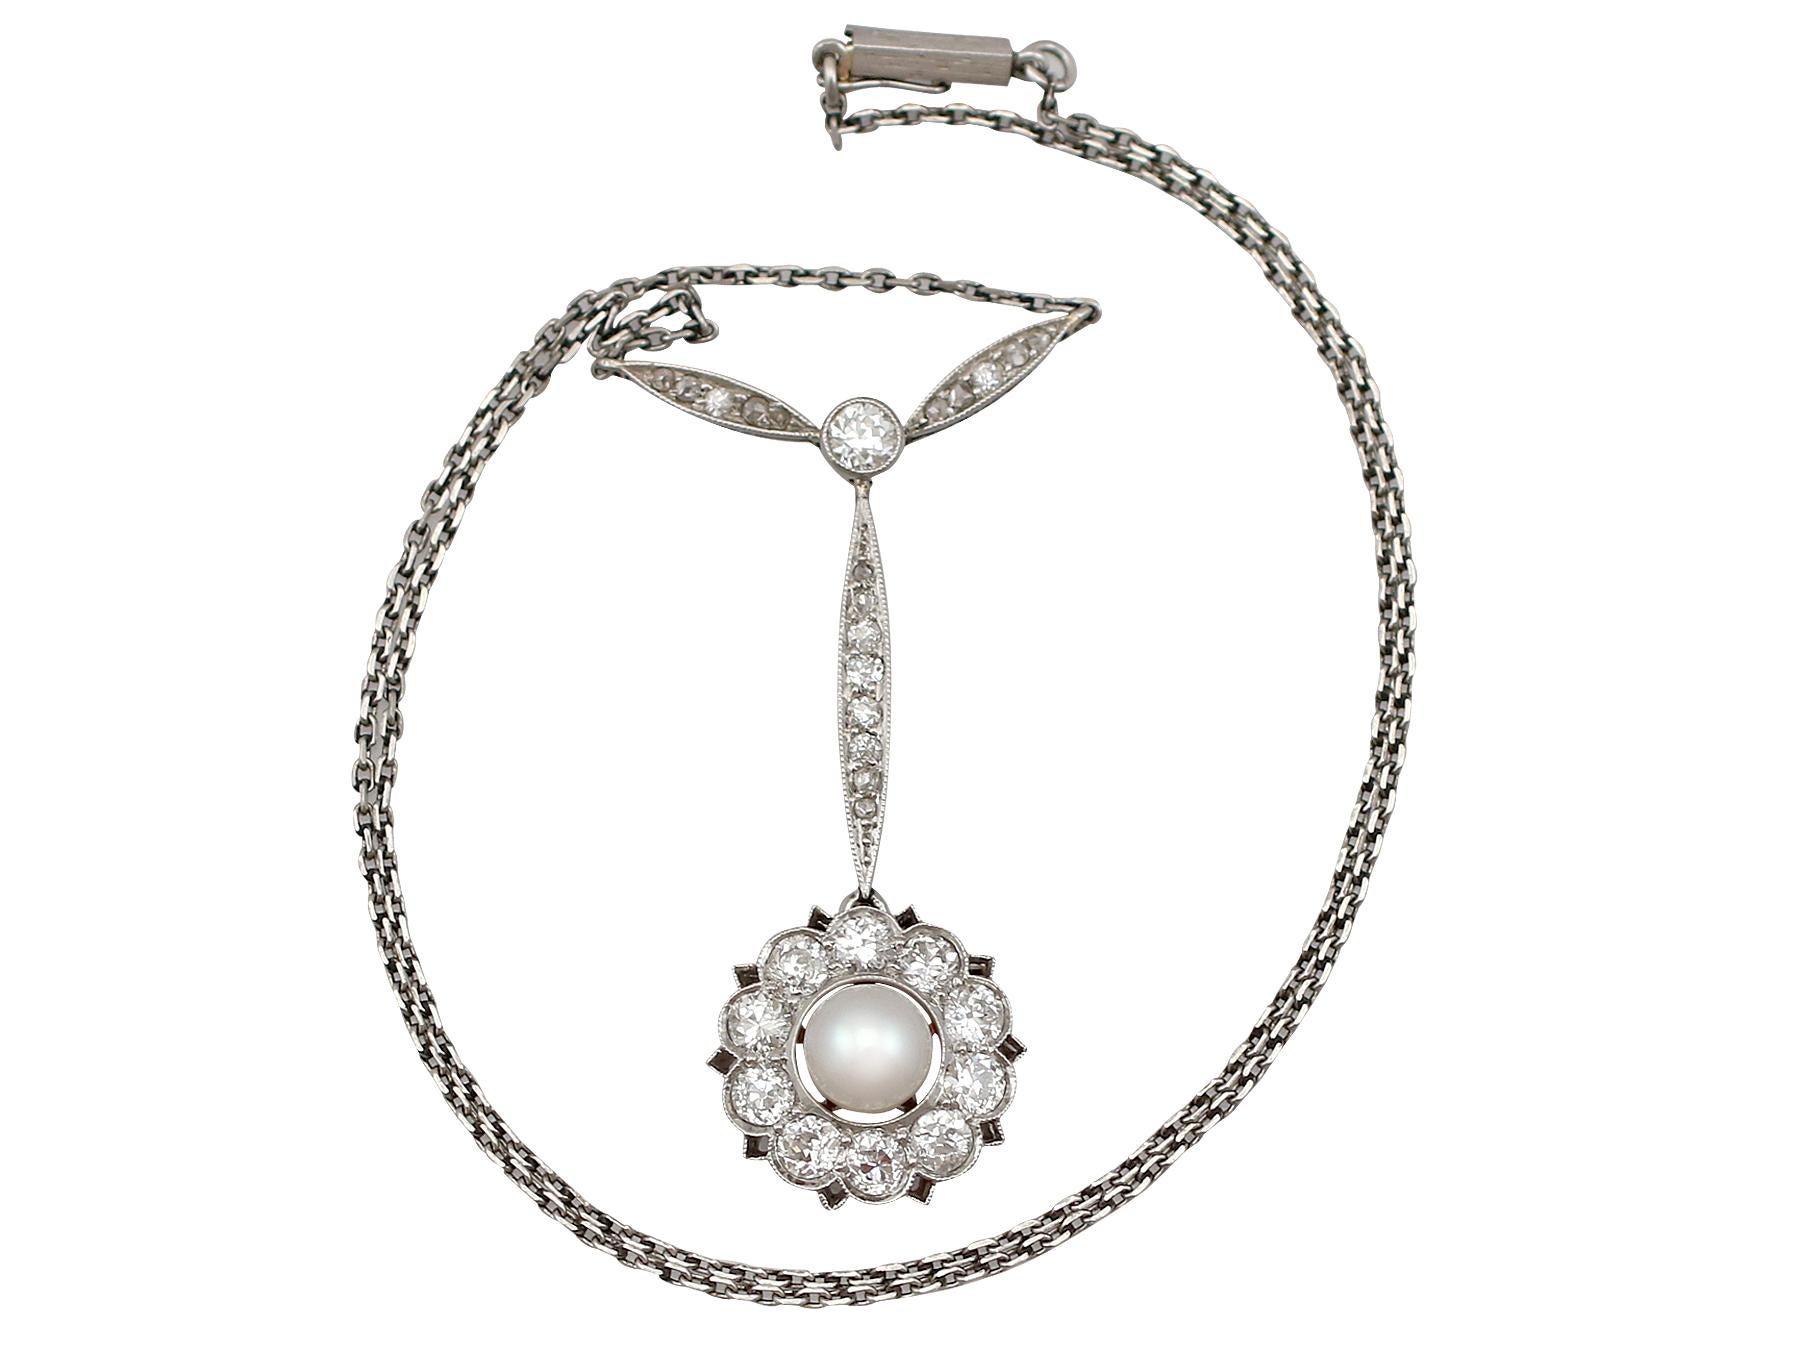 A stunning vintage 1940's Art Deco single pearl and 1.55 carat diamond, platinum necklace; part of our diverse pearl jewellery and estate jewelry collections.

This stunning, fine and impressive single pearl and diamond necklace has been crafted in